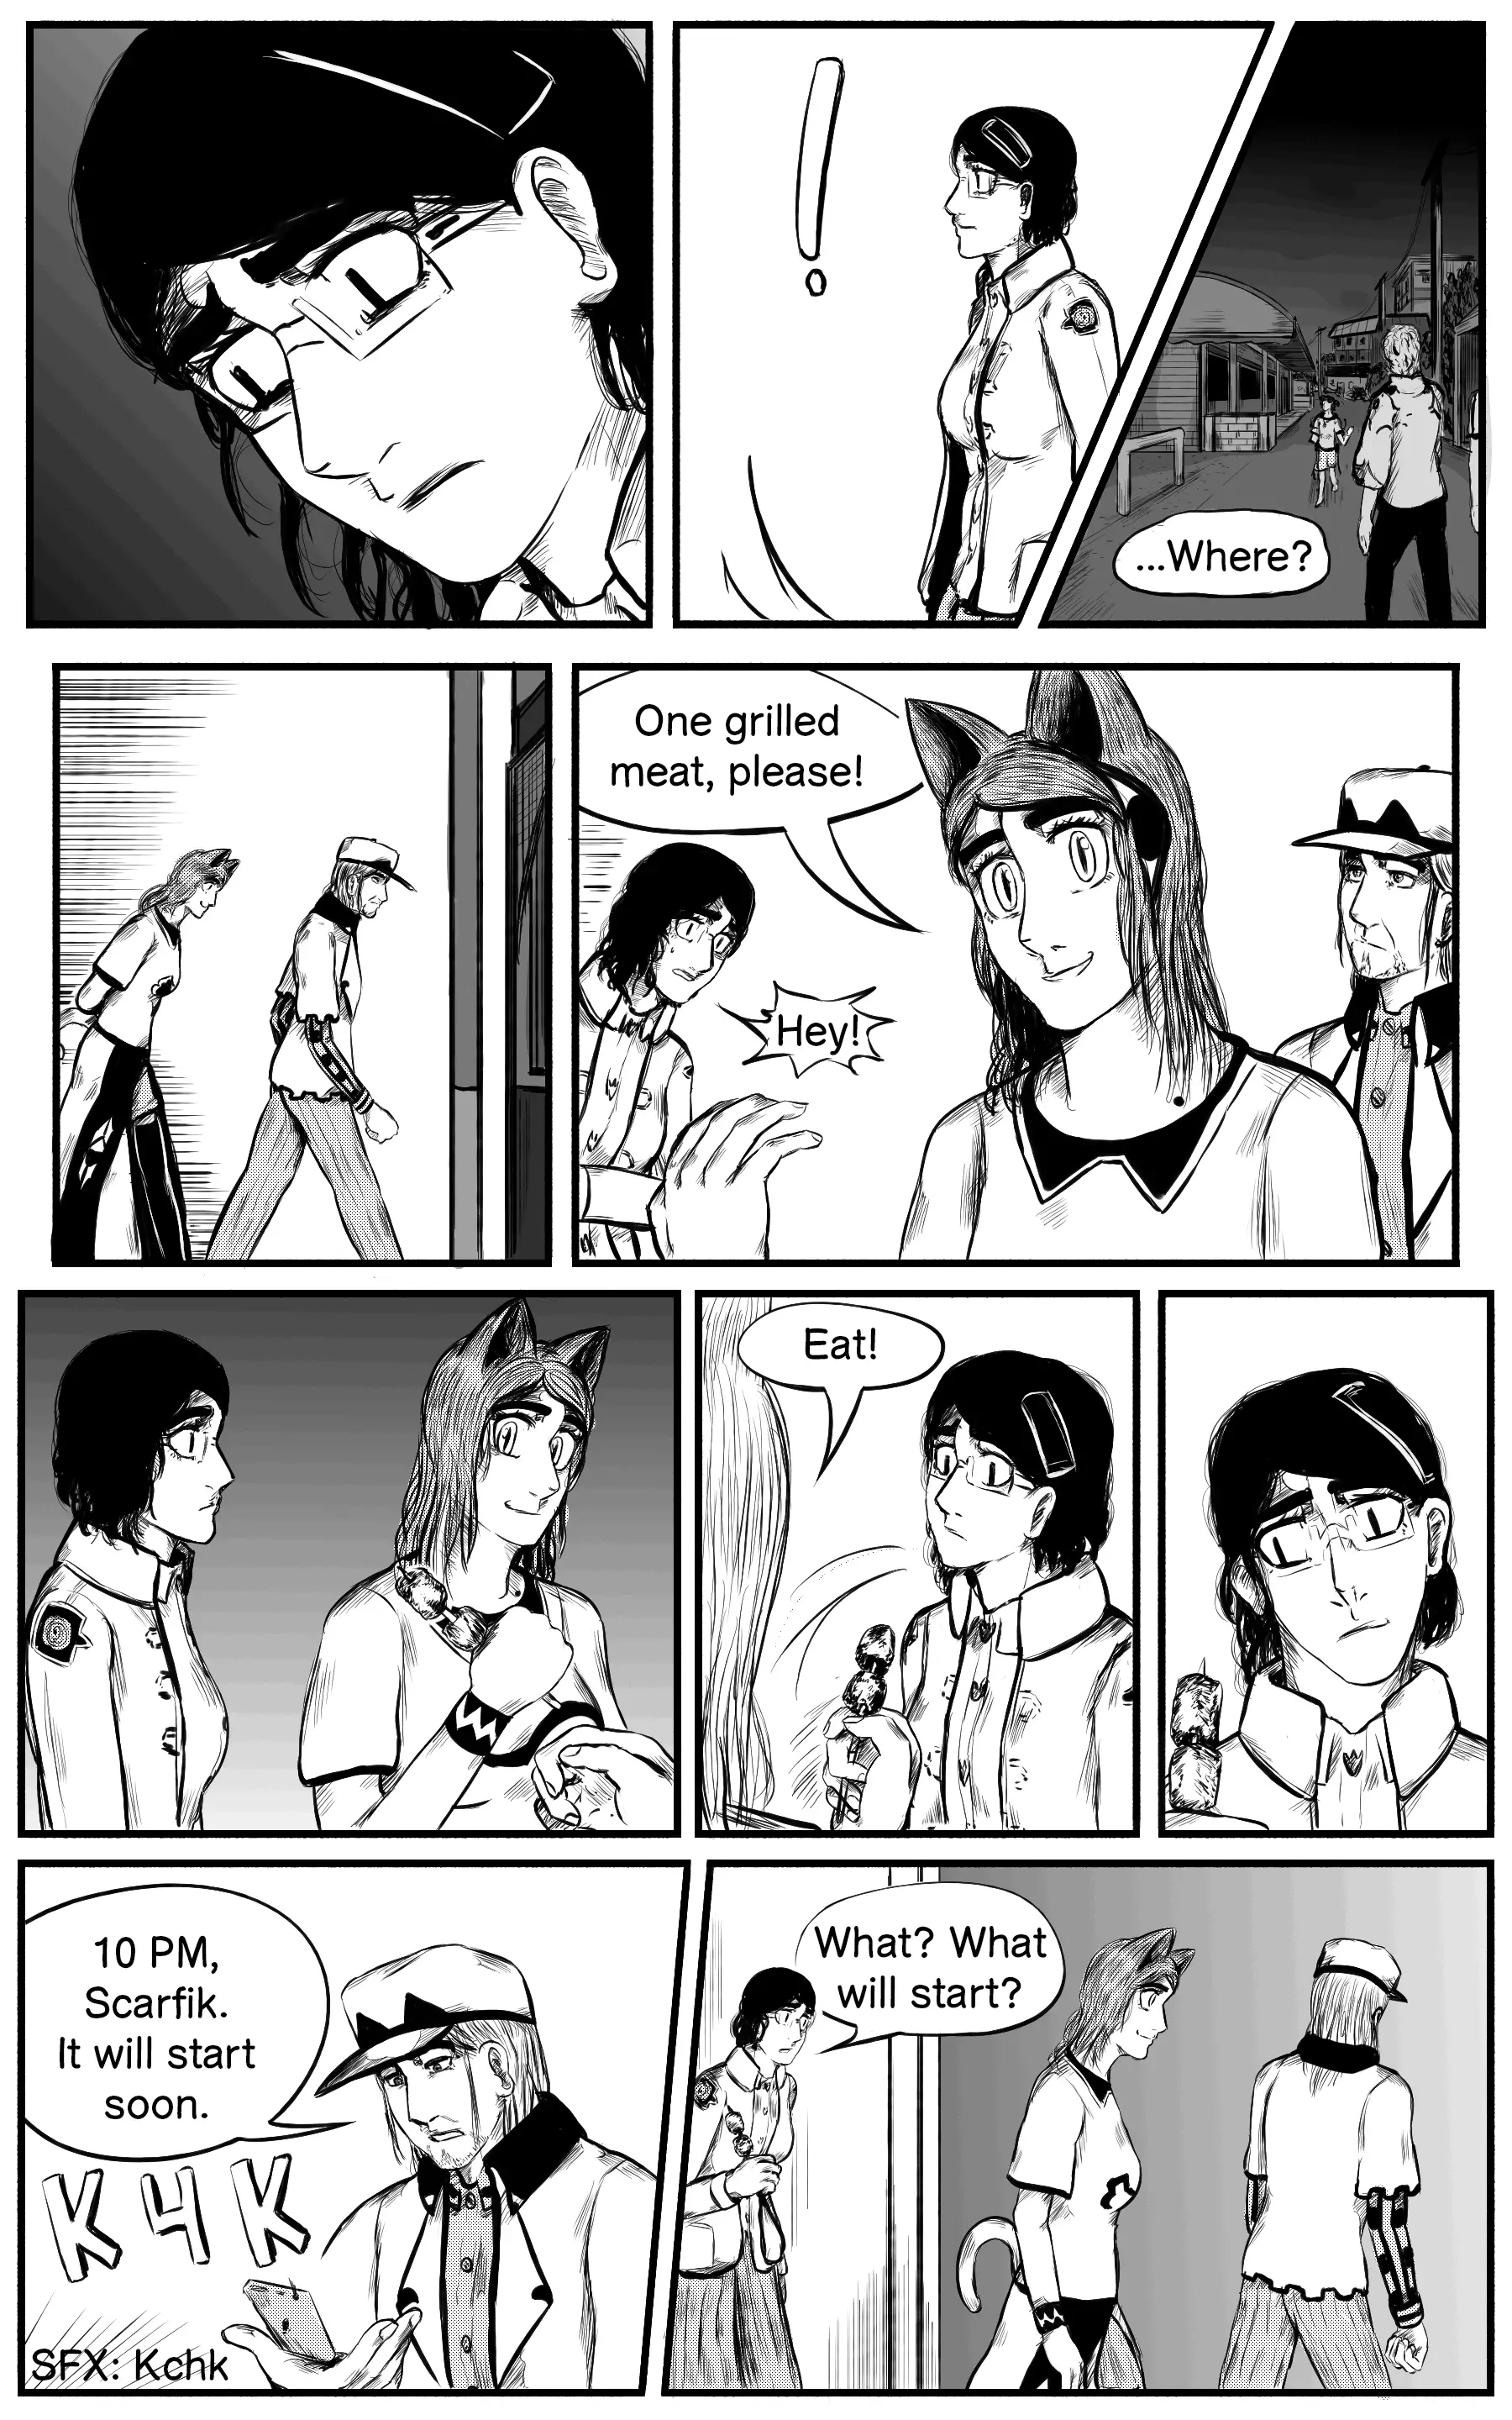 A Party Cure - 10 page 8-06bf5d05